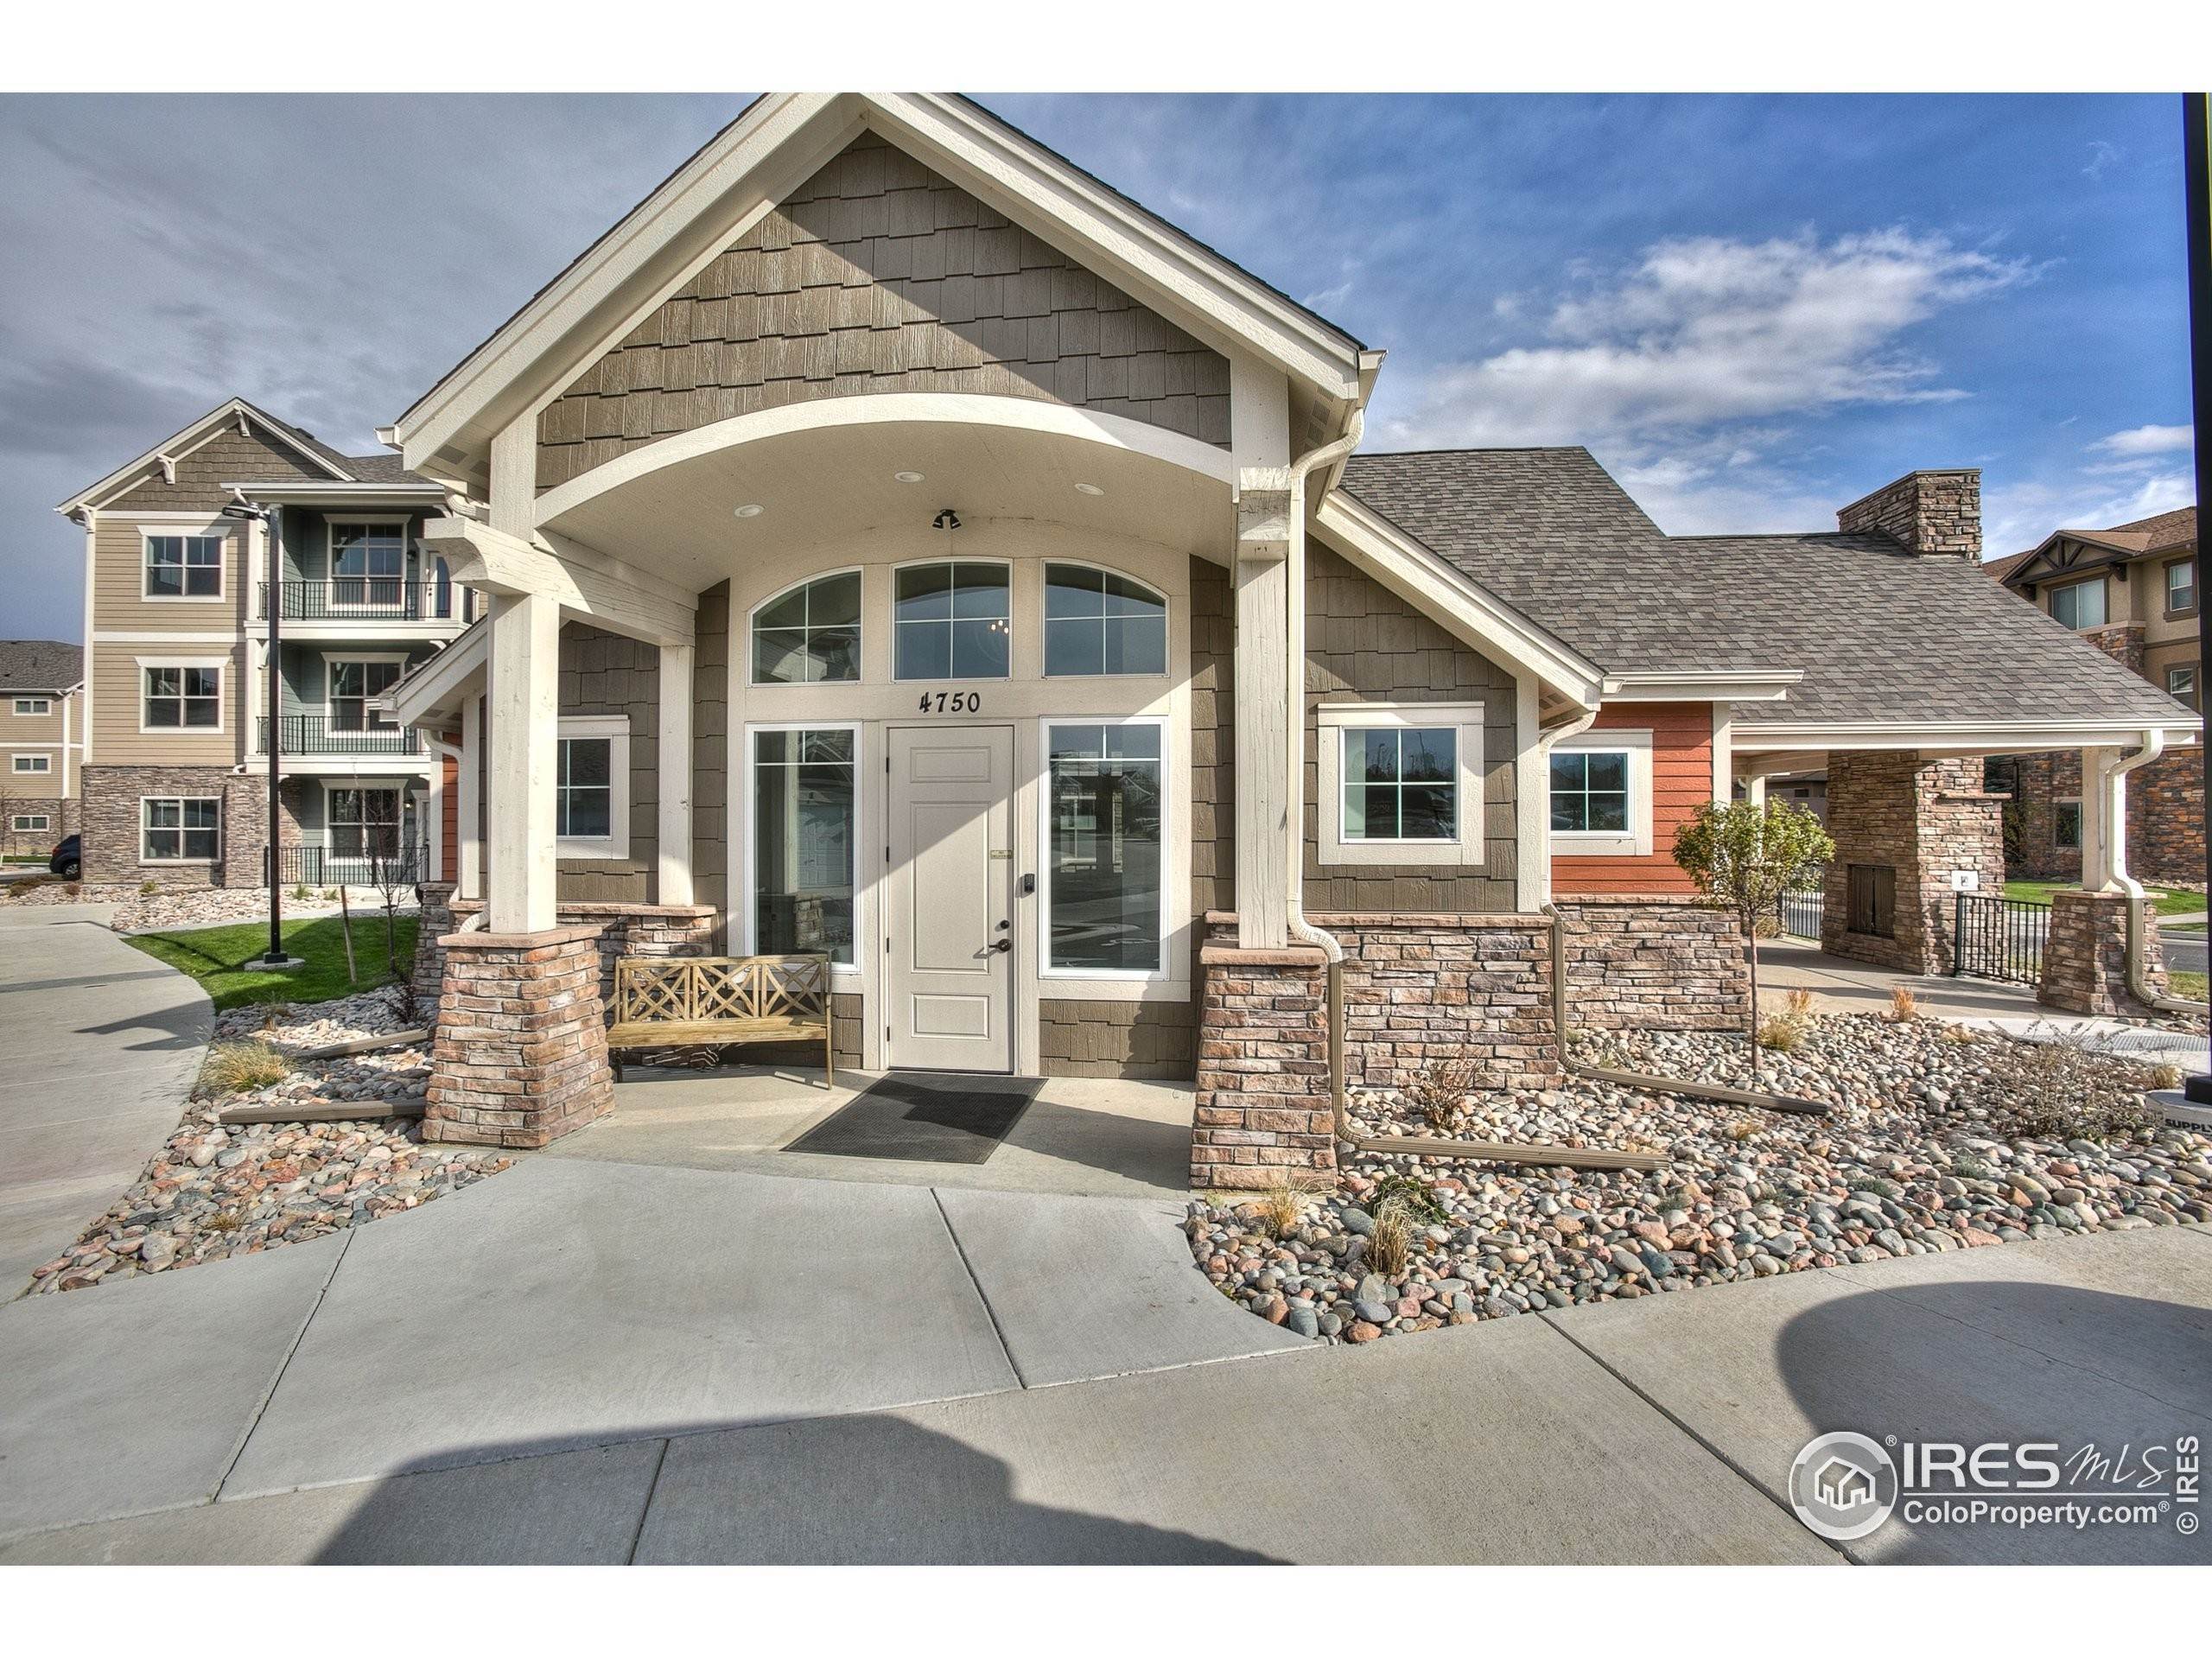 2. Single Family Homes for Active at 4622 Hahns Peak Drive 101 Loveland, Colorado 80538 United States